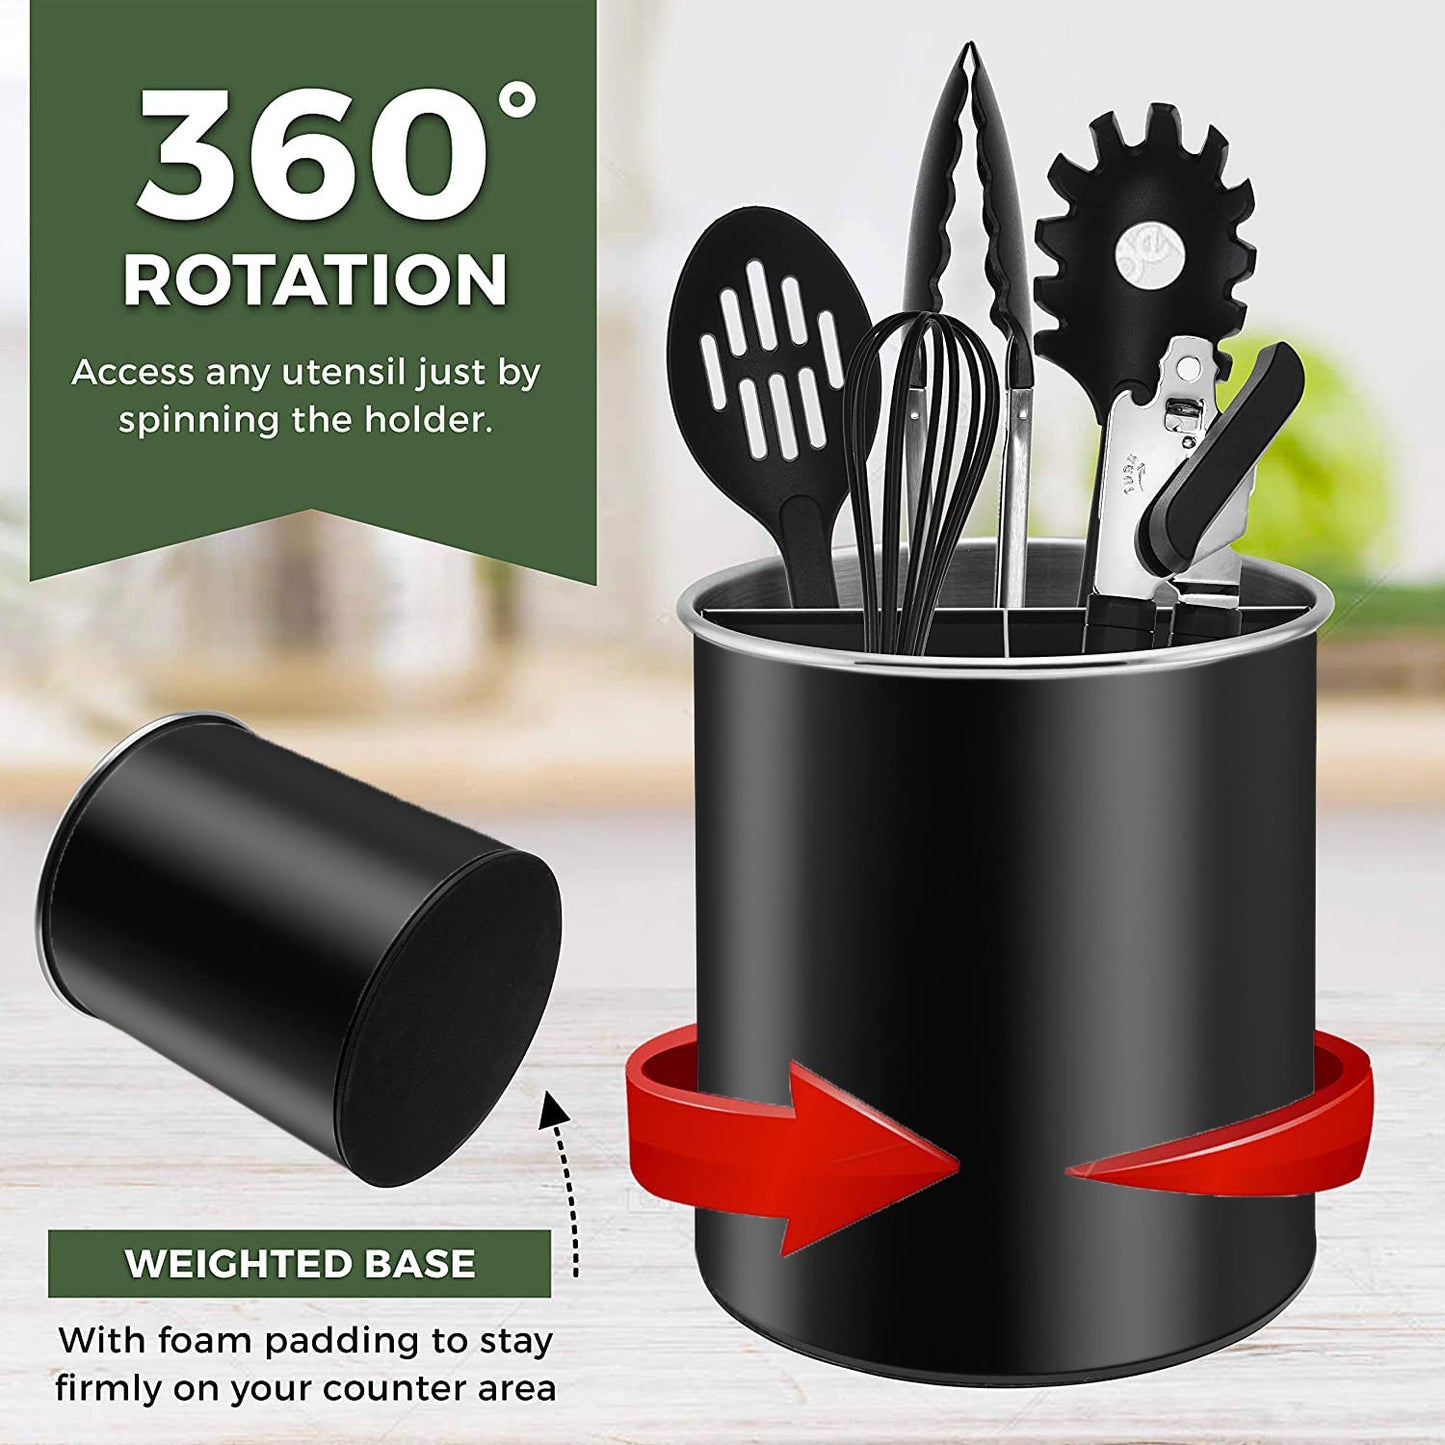 Bartnelli Extra Large Stainless Steel Kitchen Utensil Holder - 360° Rotating Utensil Caddy - Weighted Base for Stability - Countertop Organizer Crock With Removable Divider (NIGHT BLACK)